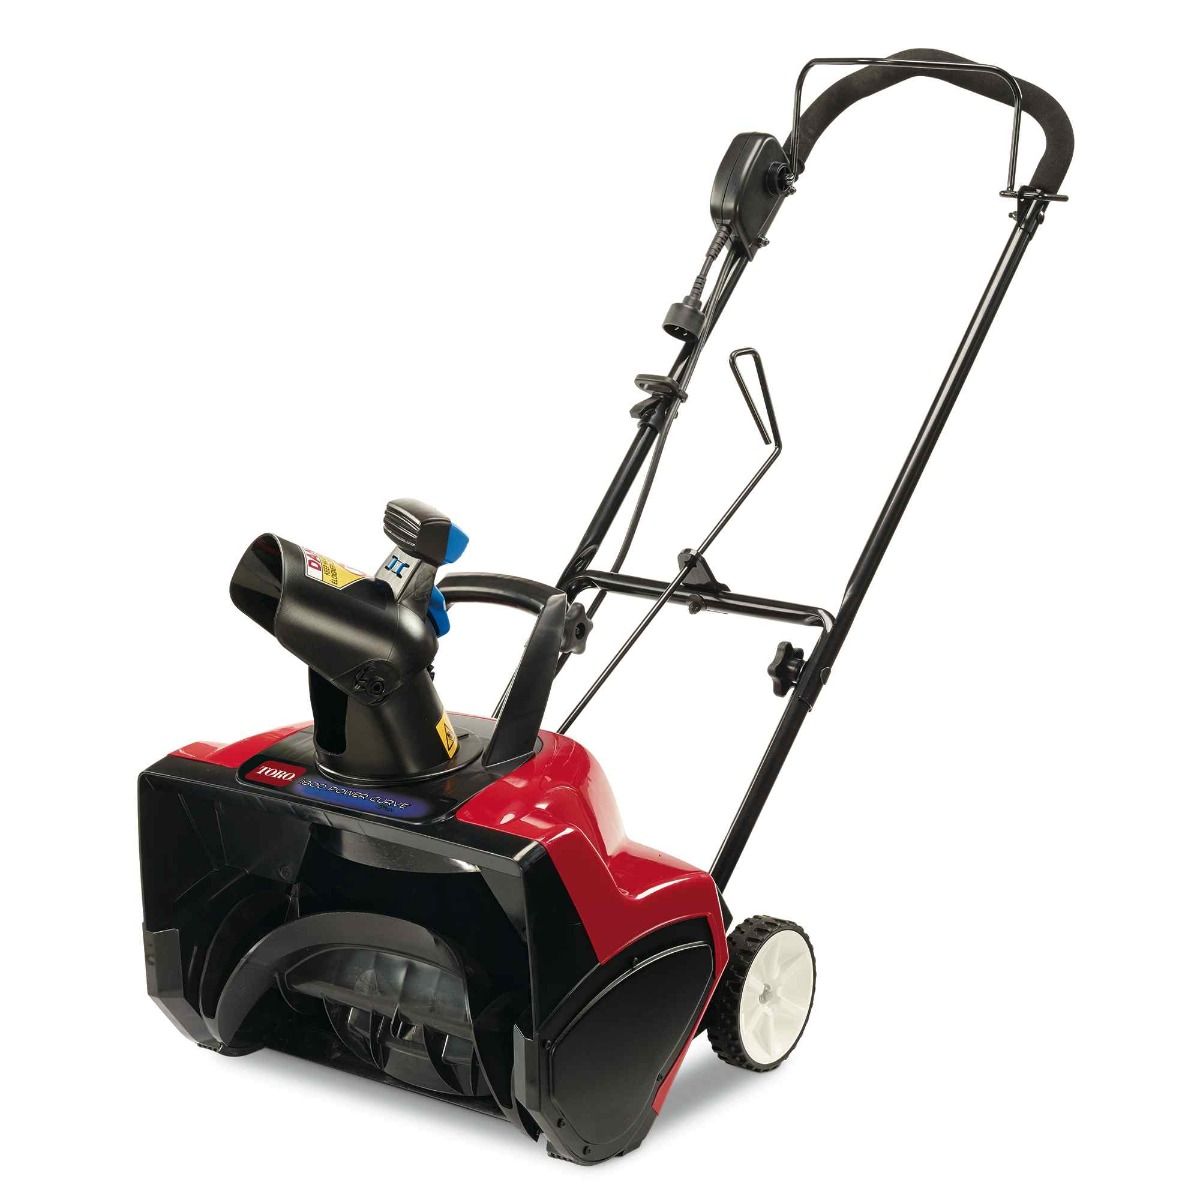 Toro 18in Electric Power Curve Snow Thrower 38381 Snow Blowers Snow Removal  bruno-cammareri.com